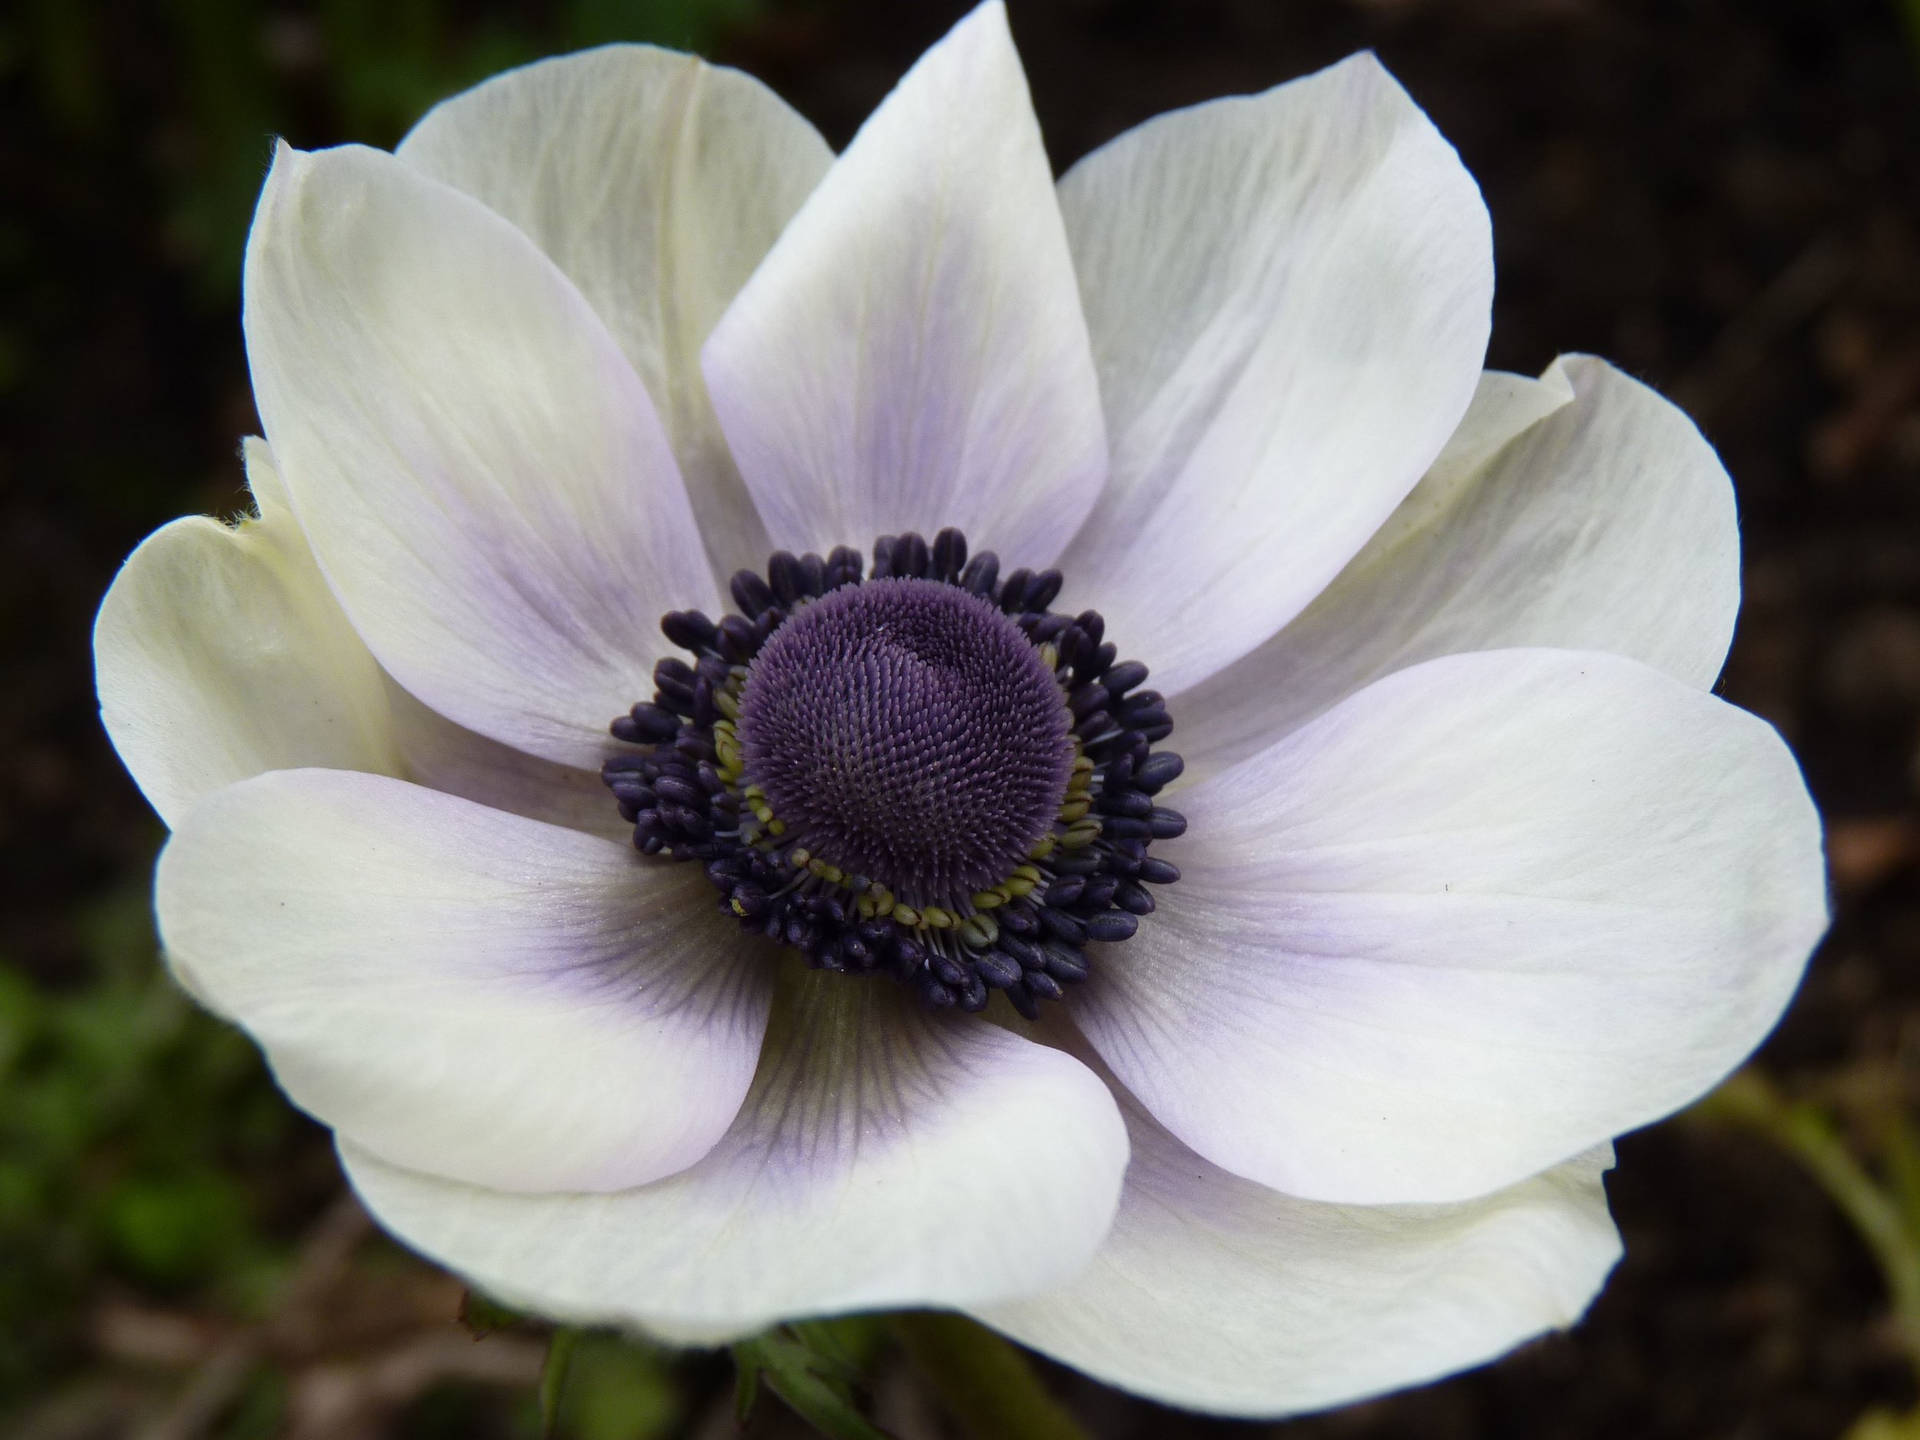 Exquisite White Anemone Flower In Full Bloom